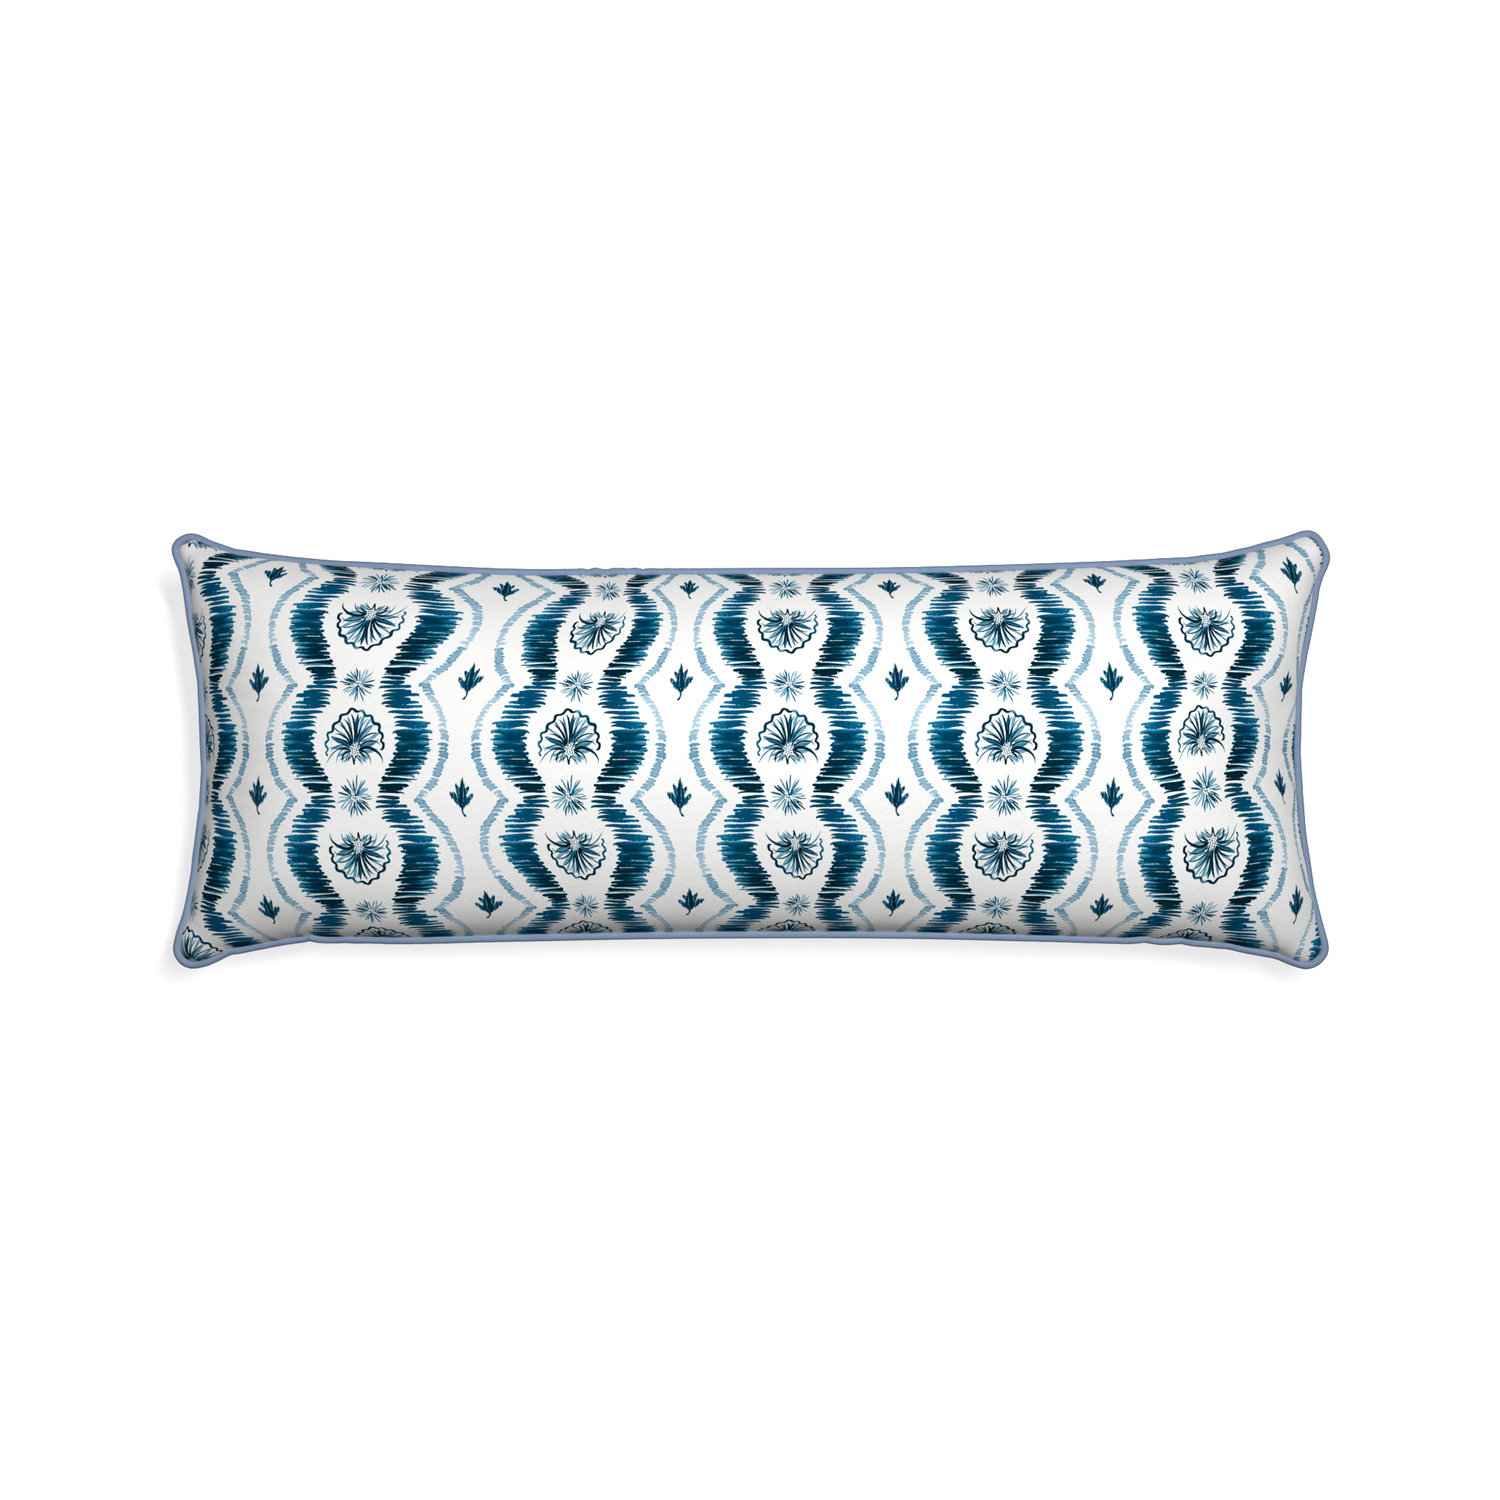 Xl-lumbar alice custom blue ikatpillow with sky piping on white background